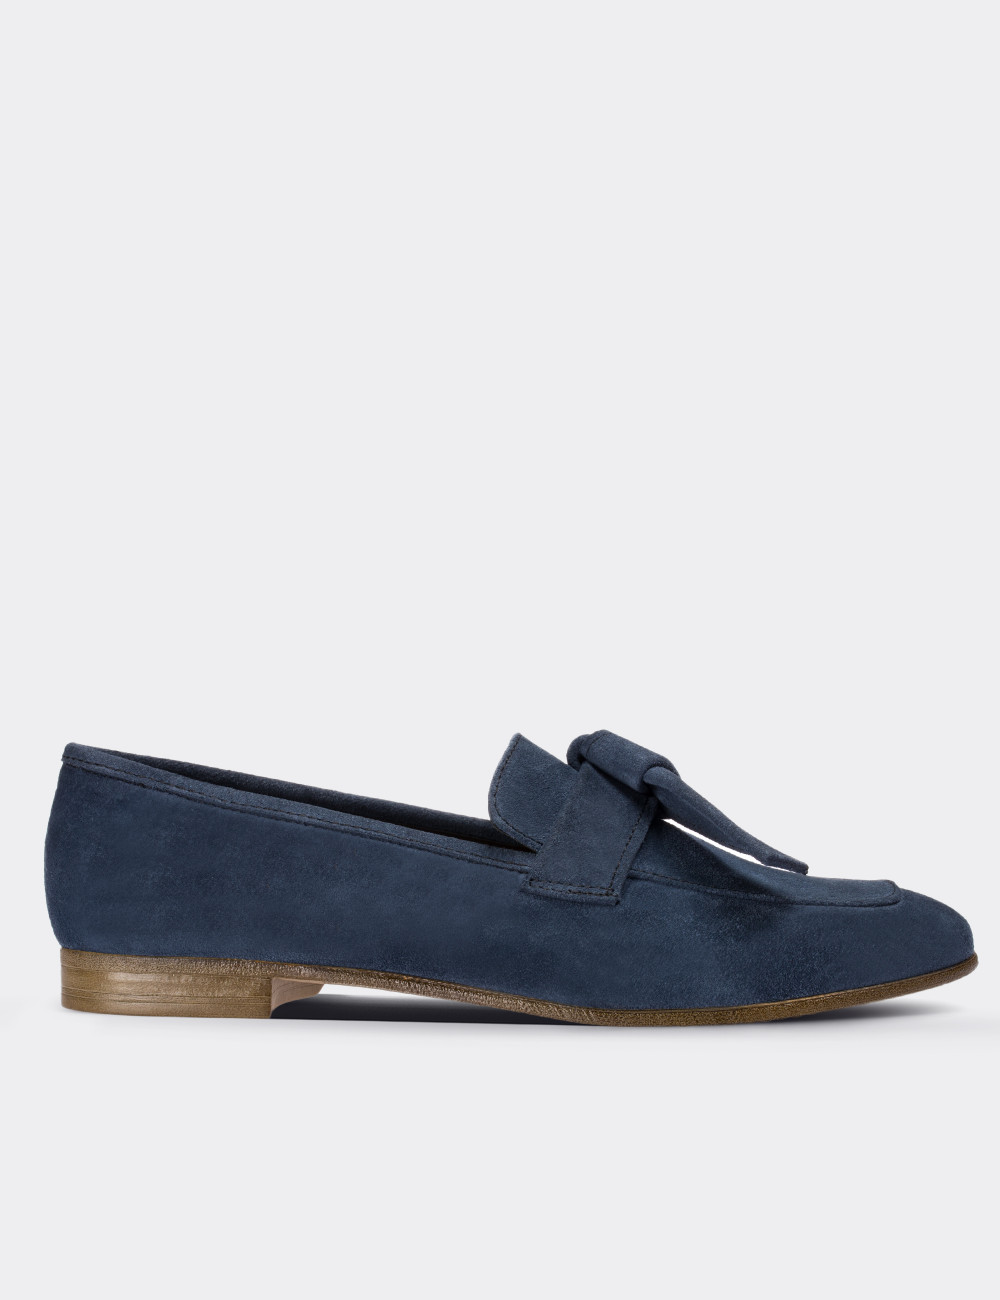 Blue Suede Leather Loafers - 01744ZMVIM01